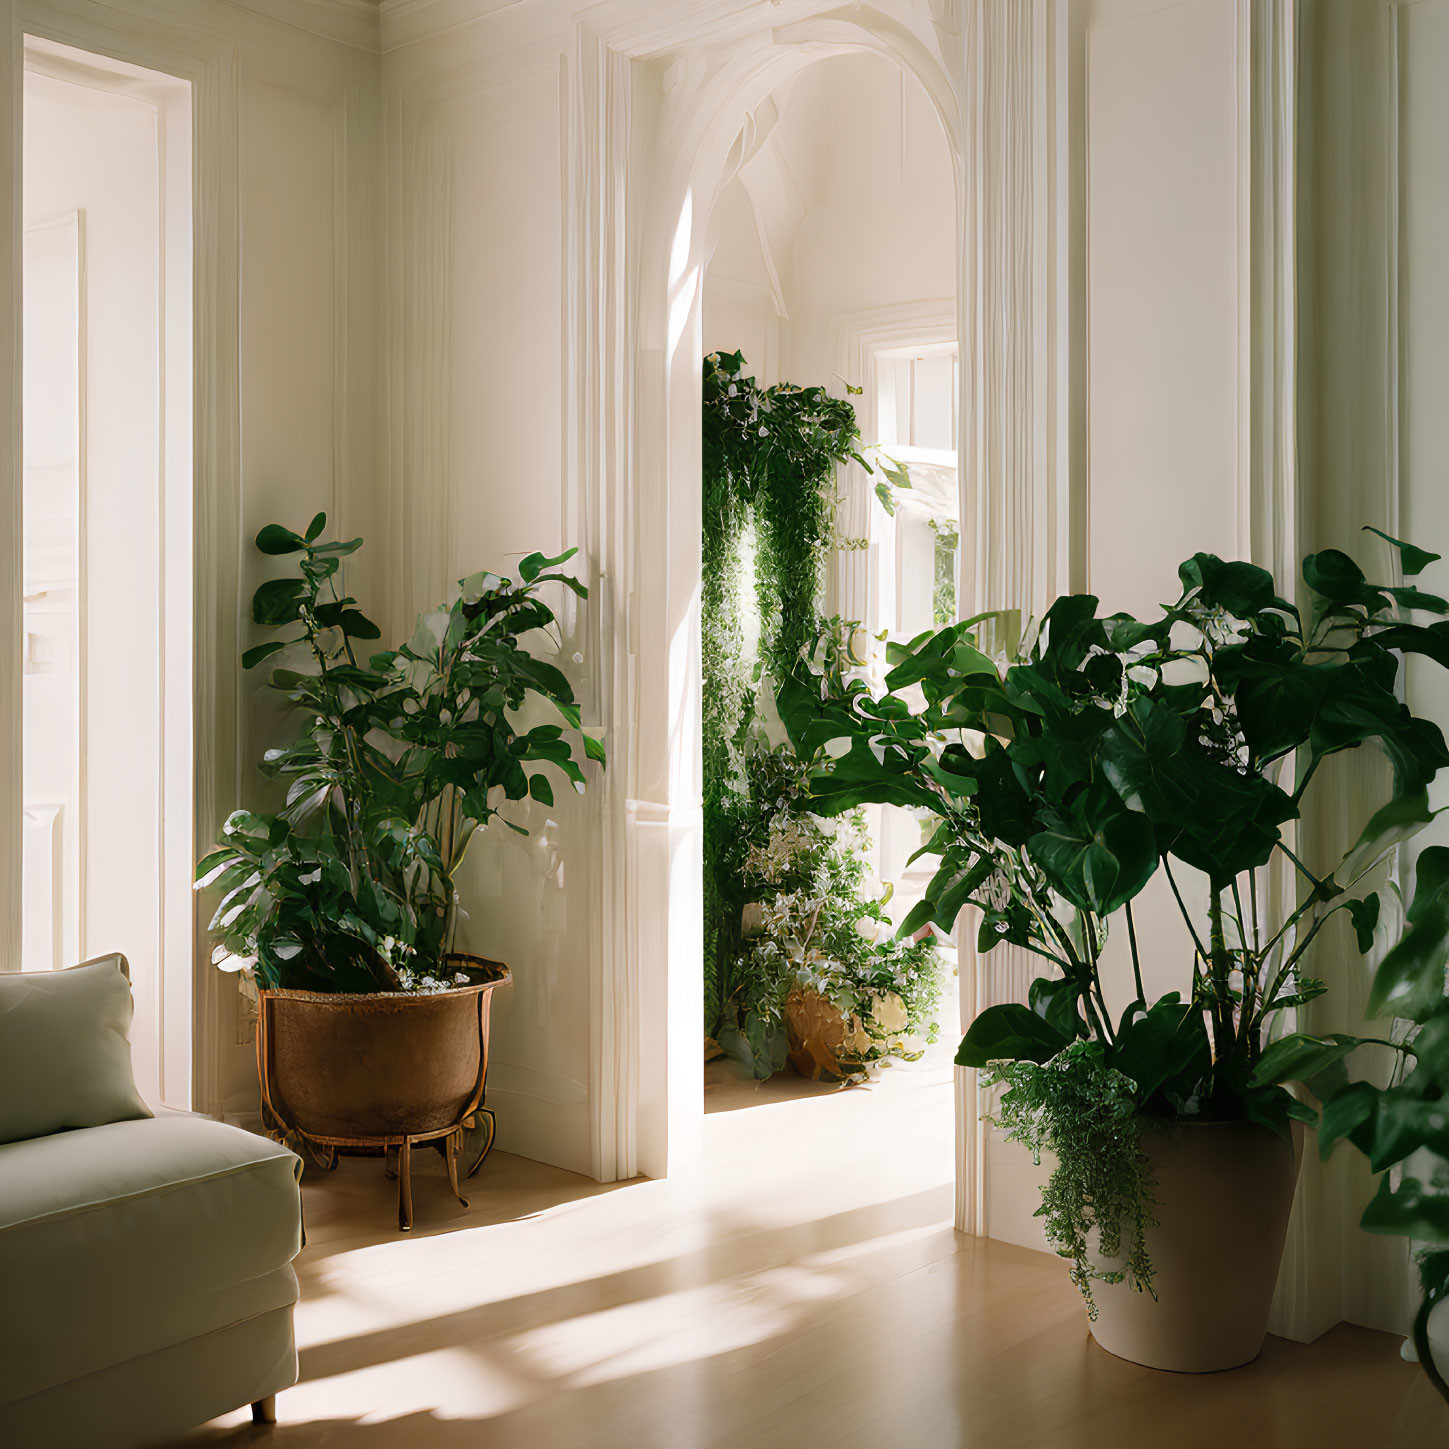 Bright sunlit room with elegant white walls and arched doorway, showcasing lush indoor plants in various pots